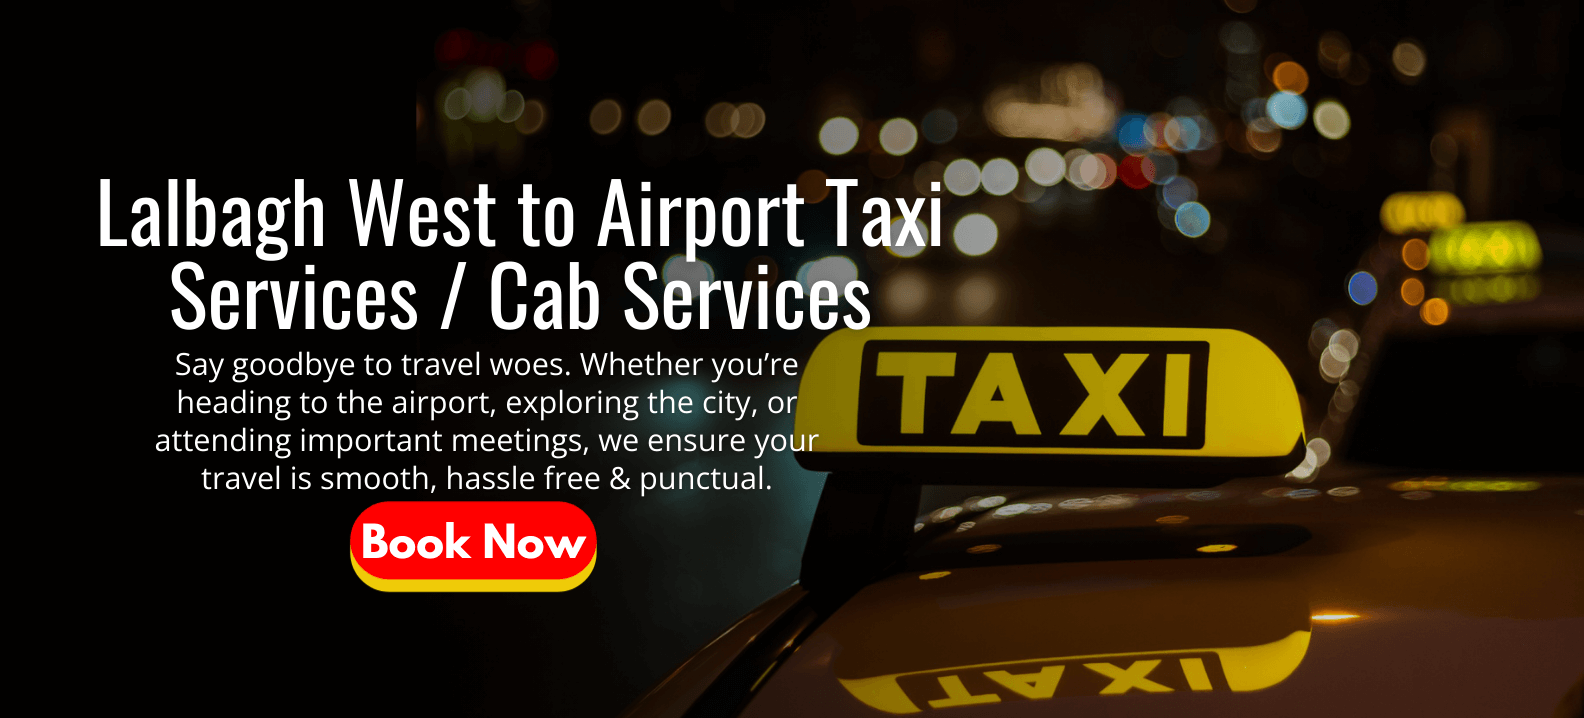 Lalbagh West to Airport Taxi Services _ Cab Services